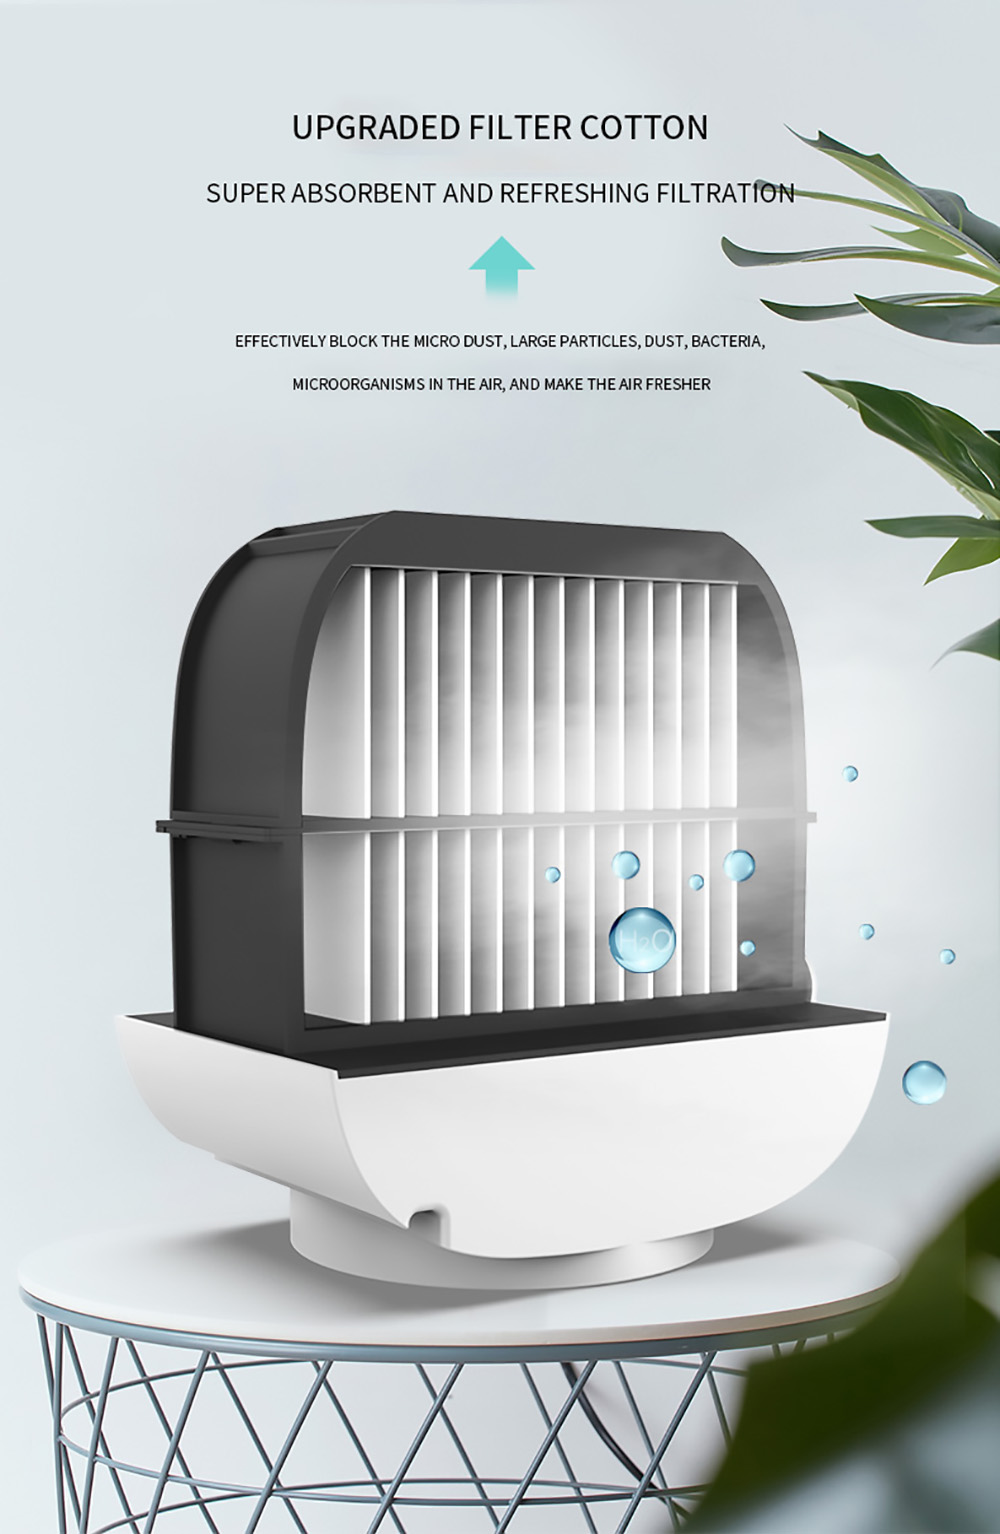 Desktop Mini Air Cooler, 3 Levels Speed, Home Air Conditioner Fan, Portable Cooling Fan, Low Noise, Night Light - Green